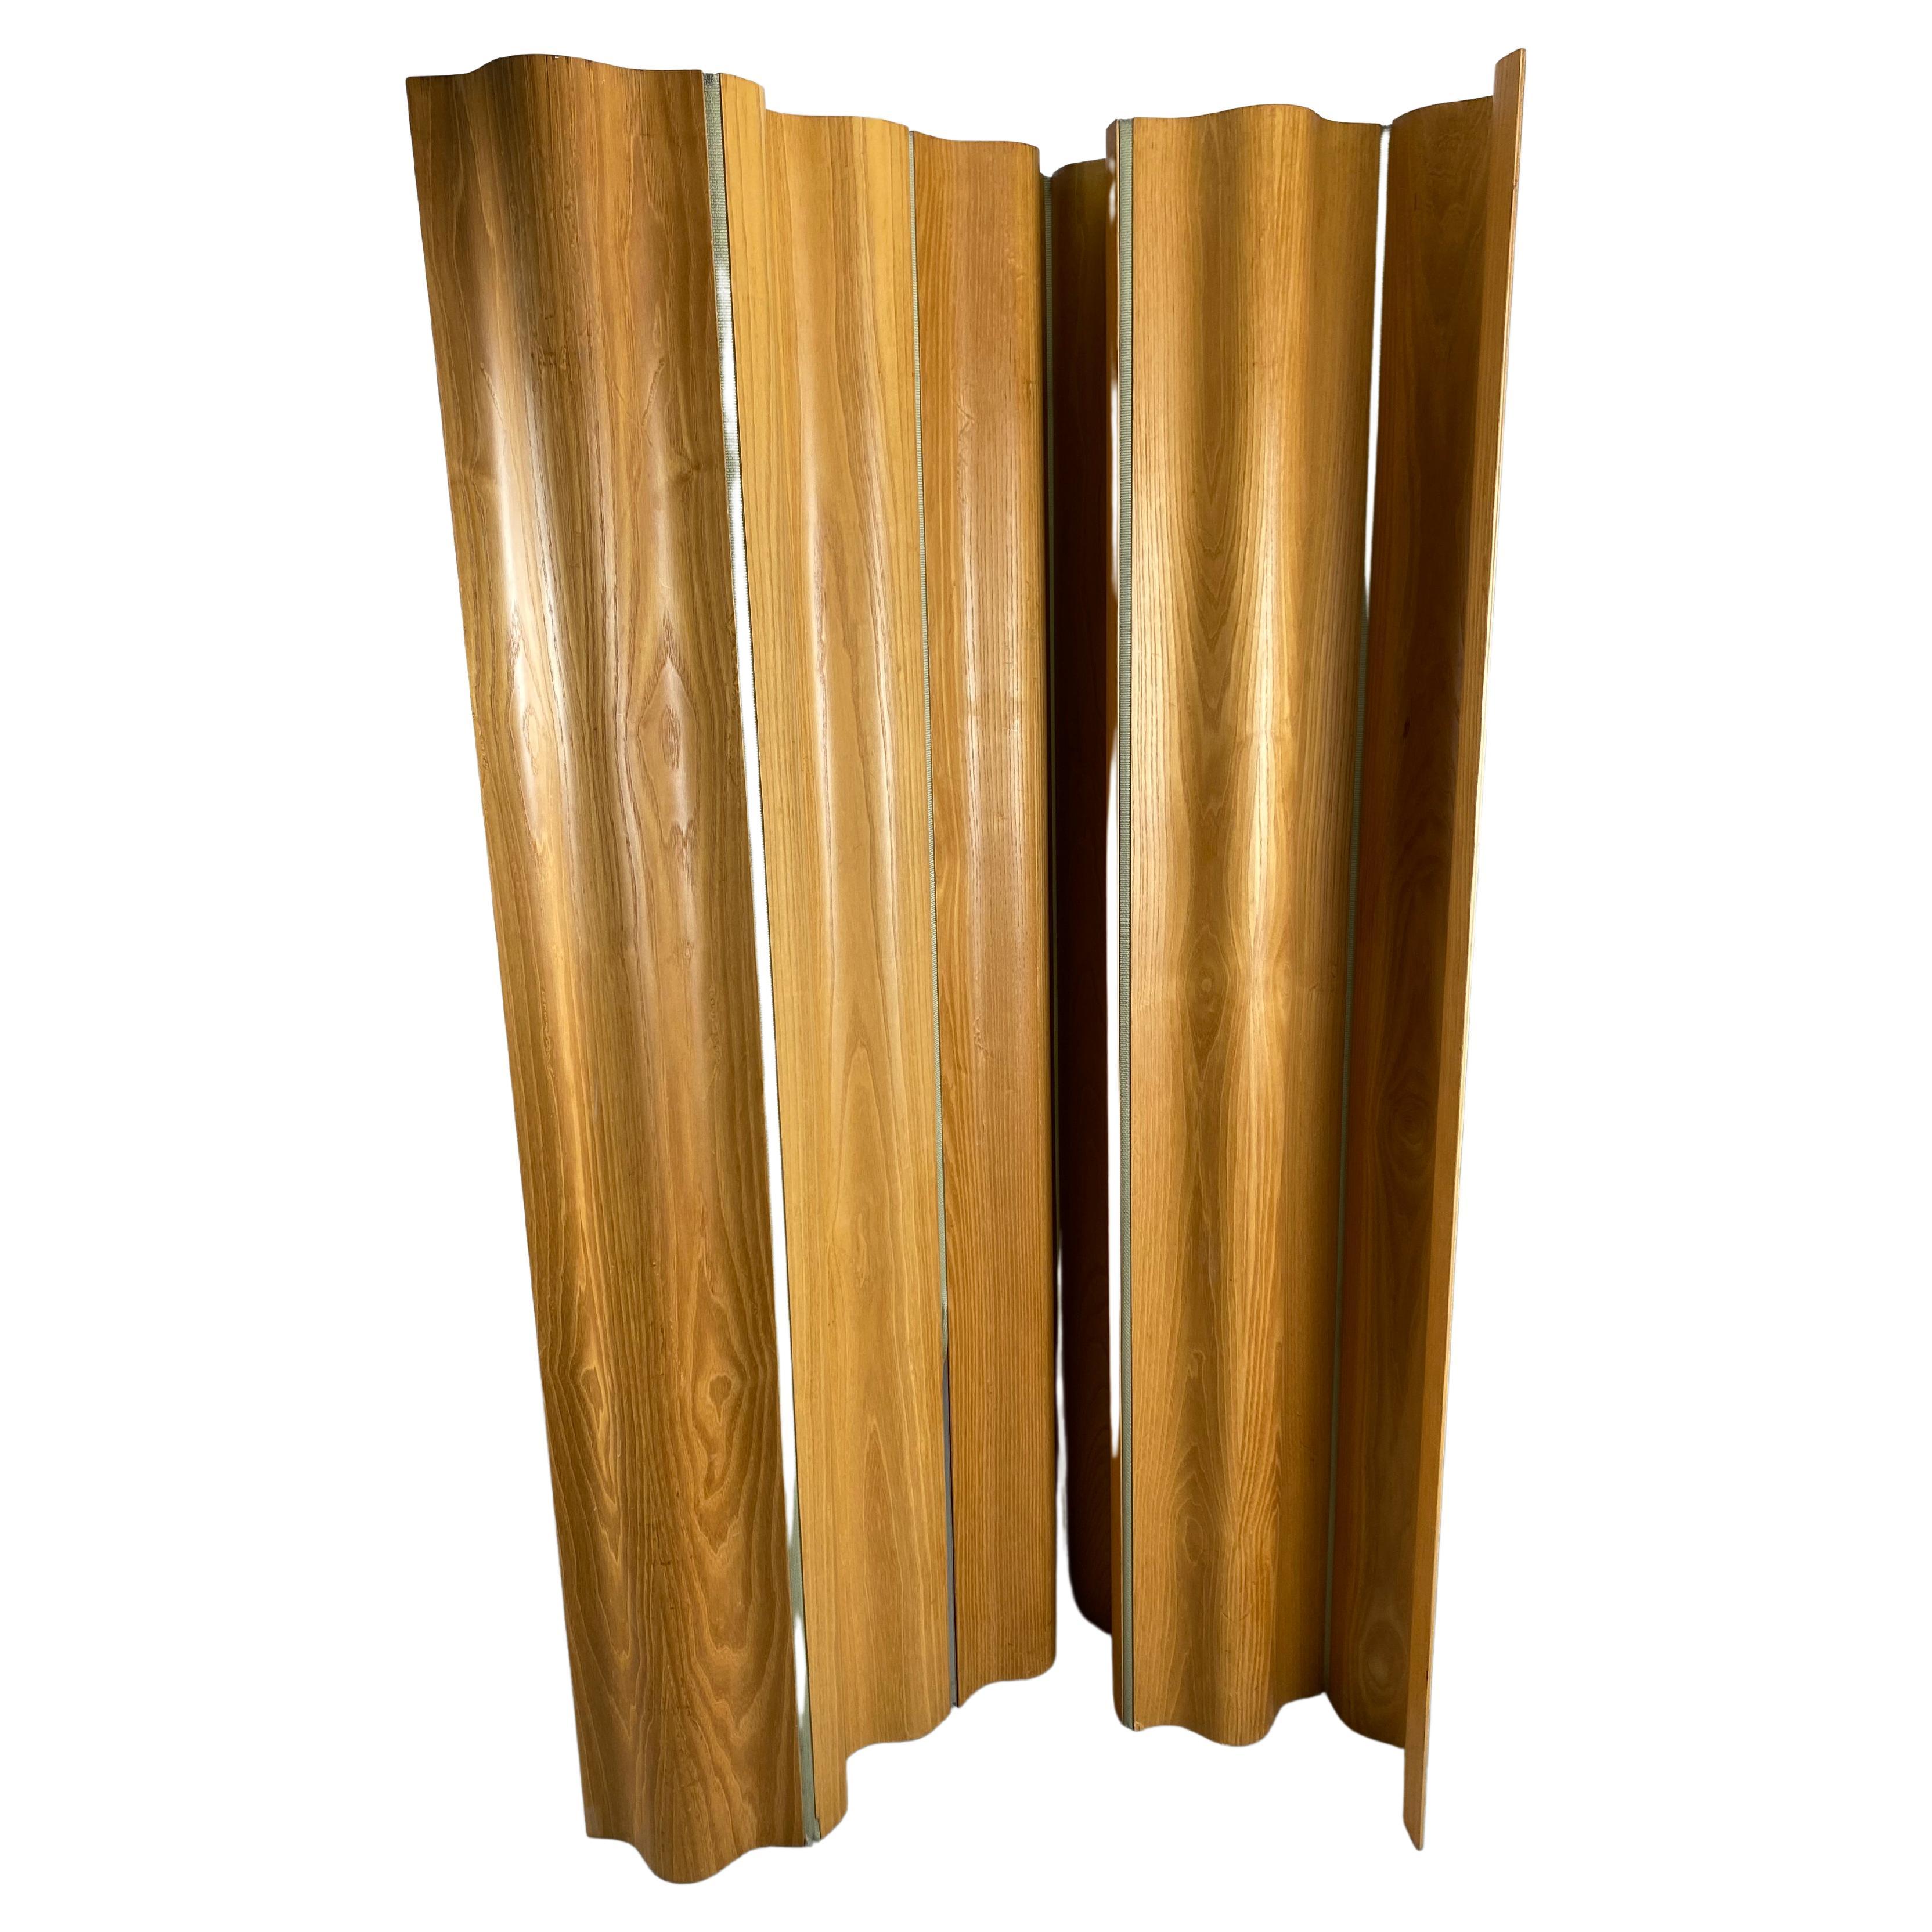 Charles and Ray Eames Plywood Folding Screen / Divider,, F S 6,,, Herman Miller